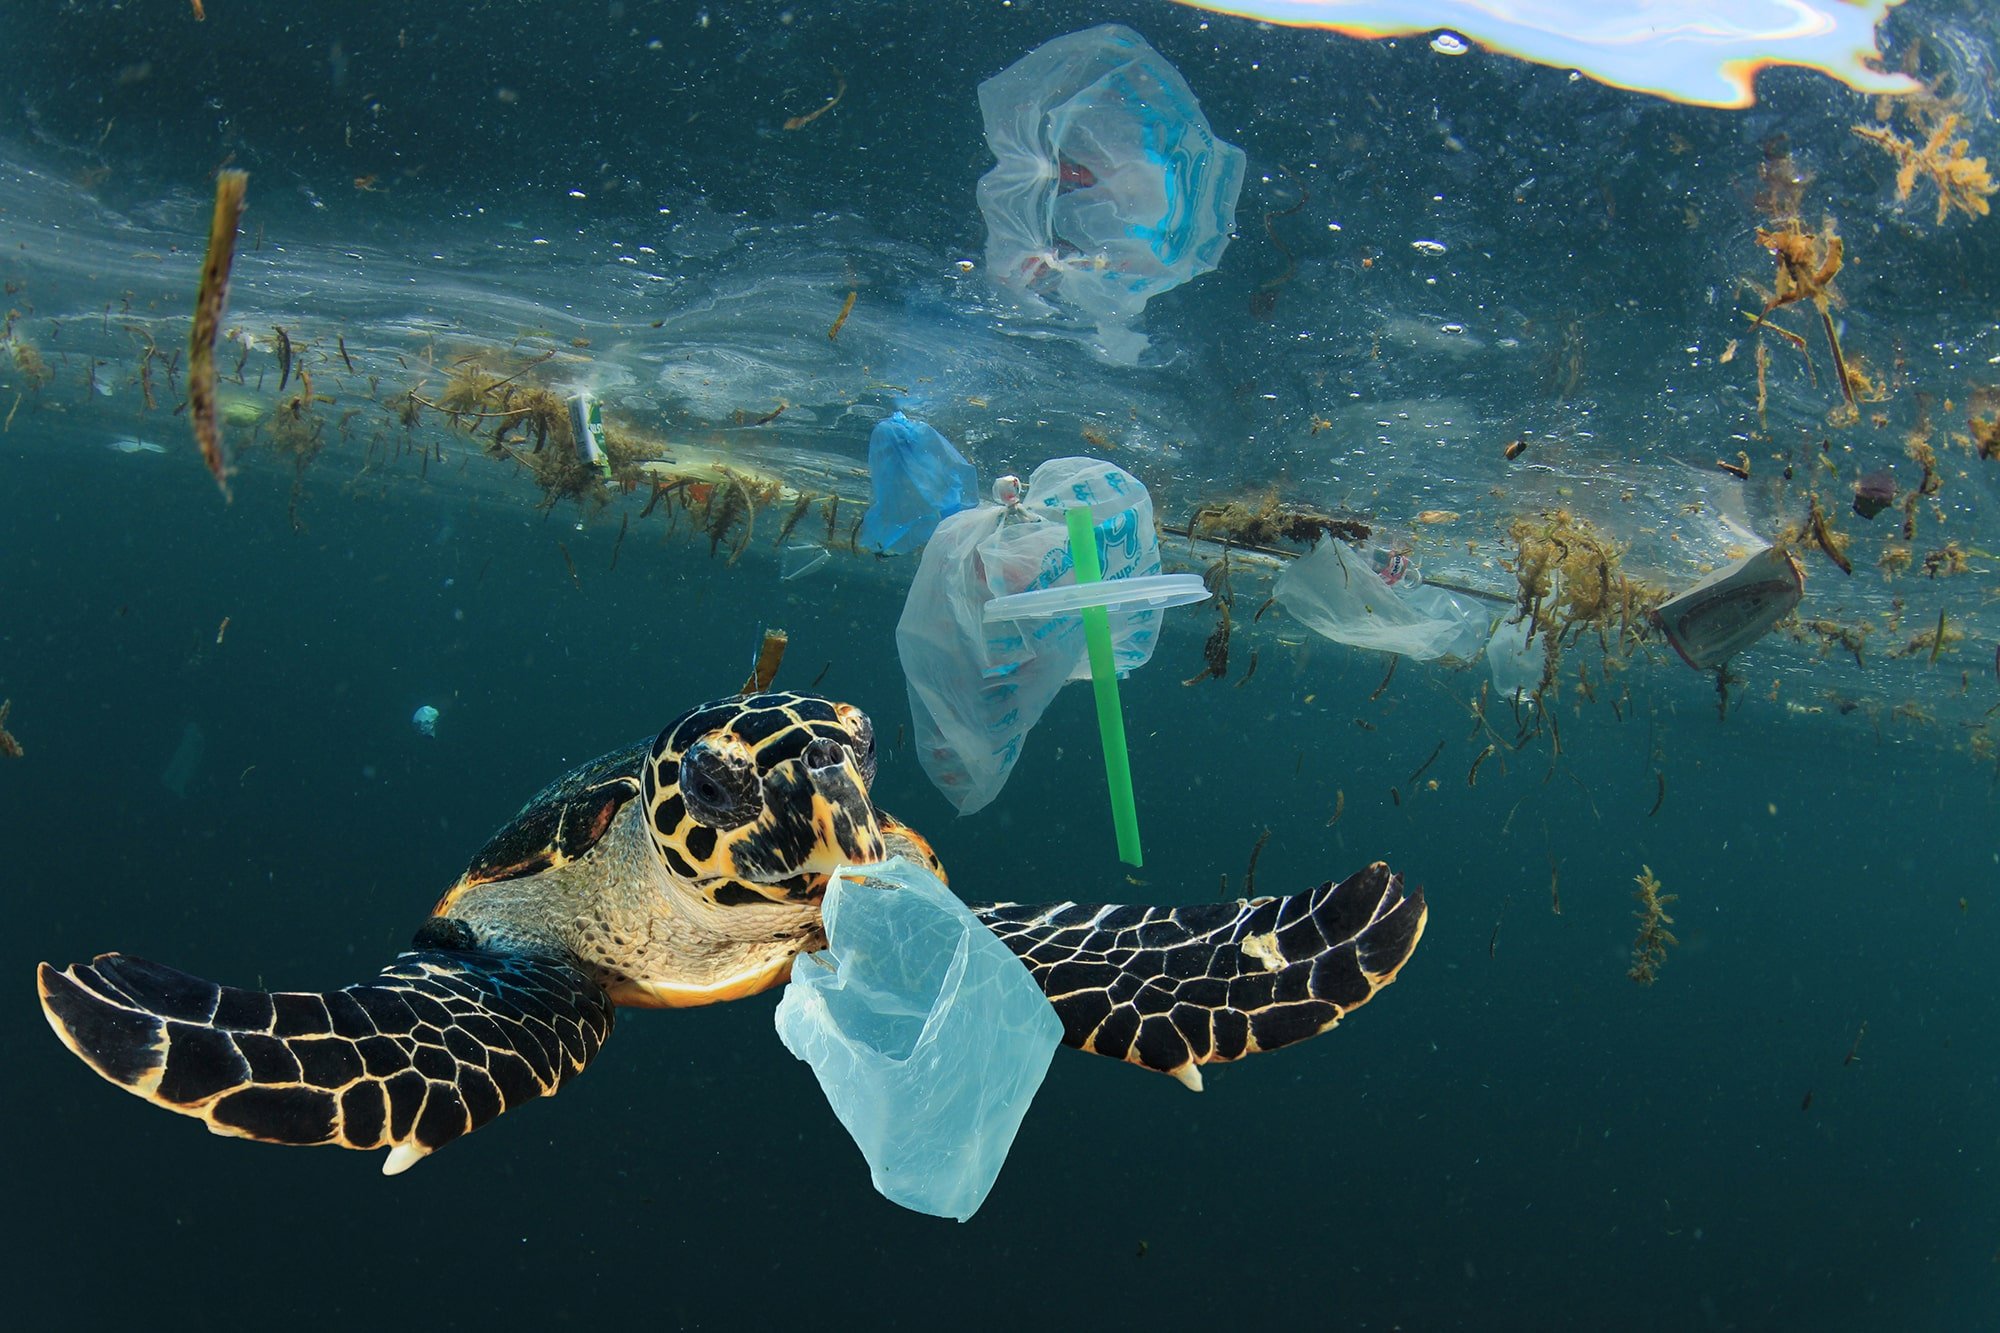 Sea turtle eating a plastic bag, mistaking it for jellyfish